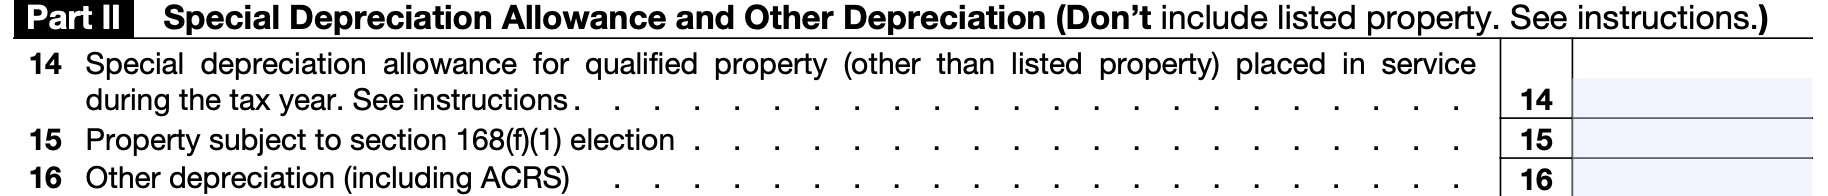 irs form 4562 part ii: special depreciation allowance and other depreciation